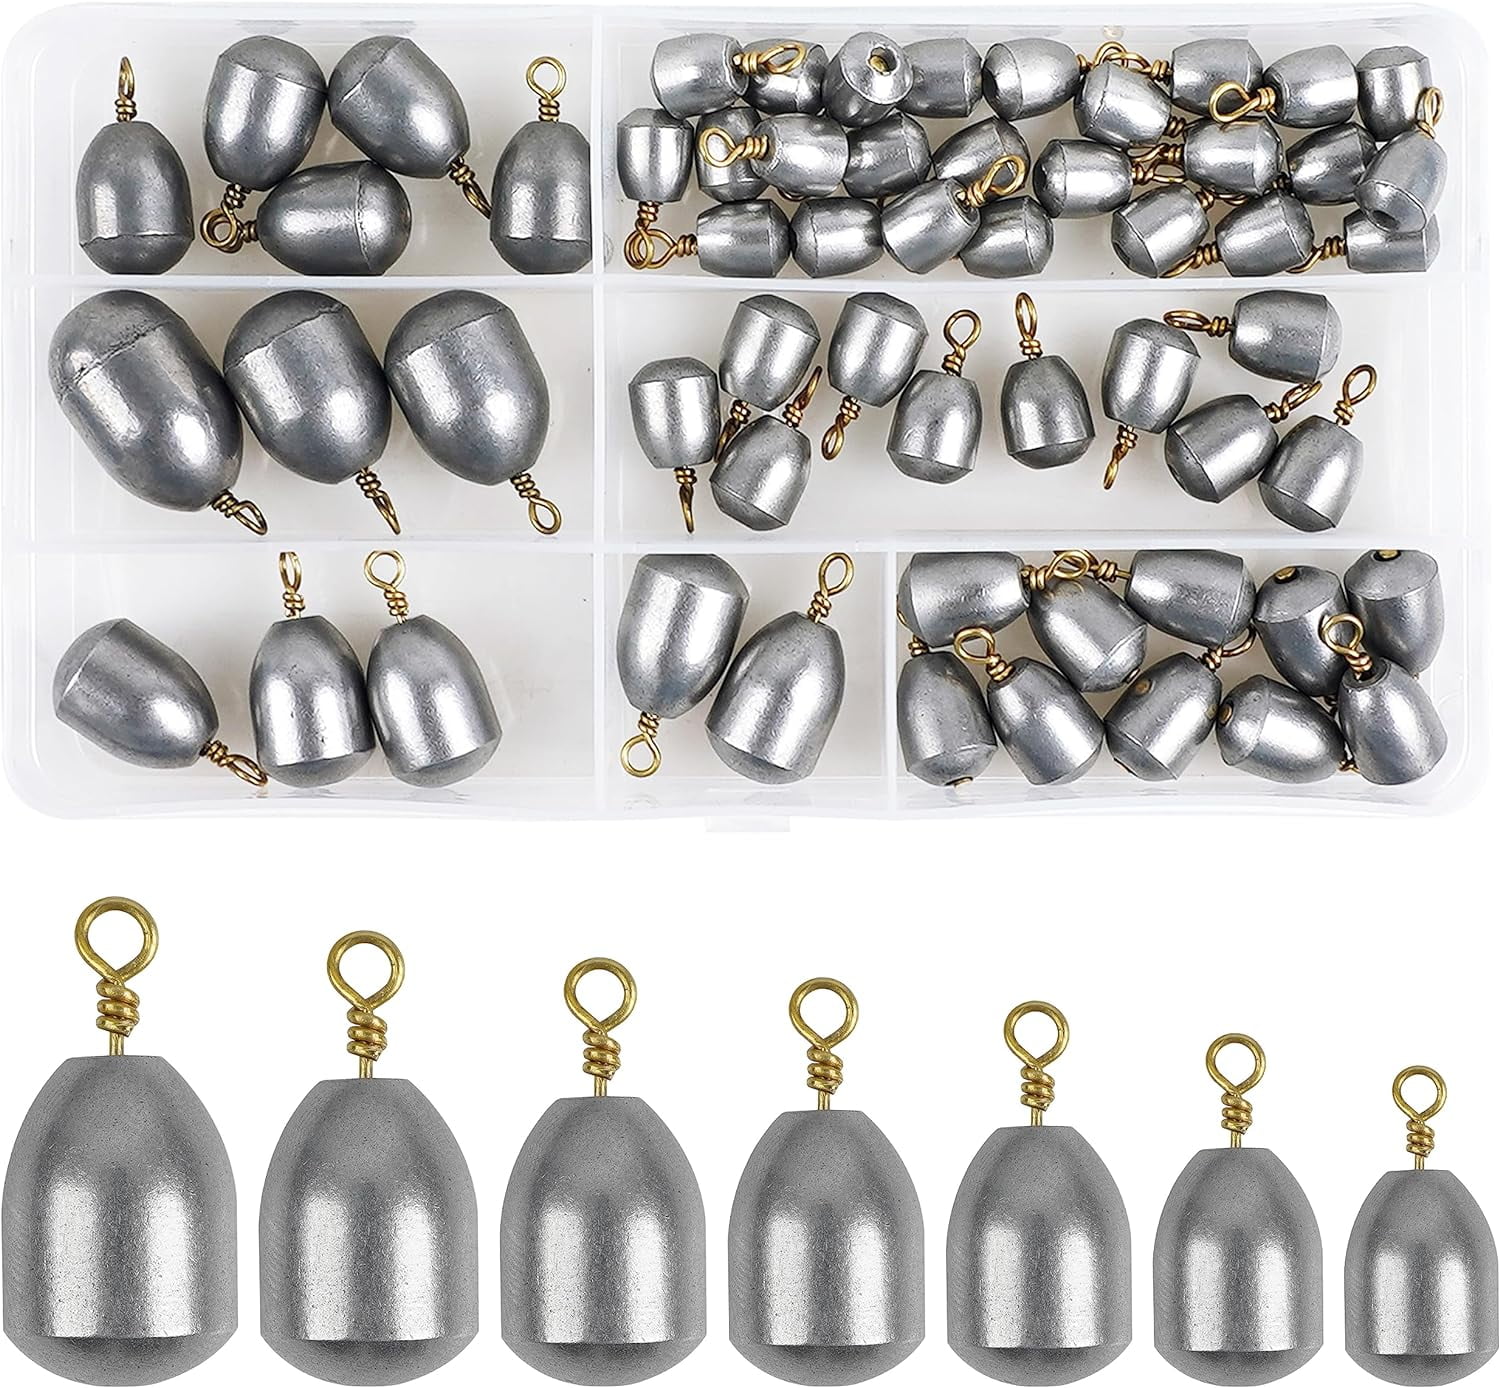 Iron Fishing Weights Assortment, 58pcs Fish Bass Sinkers Casting Weight Kit  with Tackle Box 7 Weights